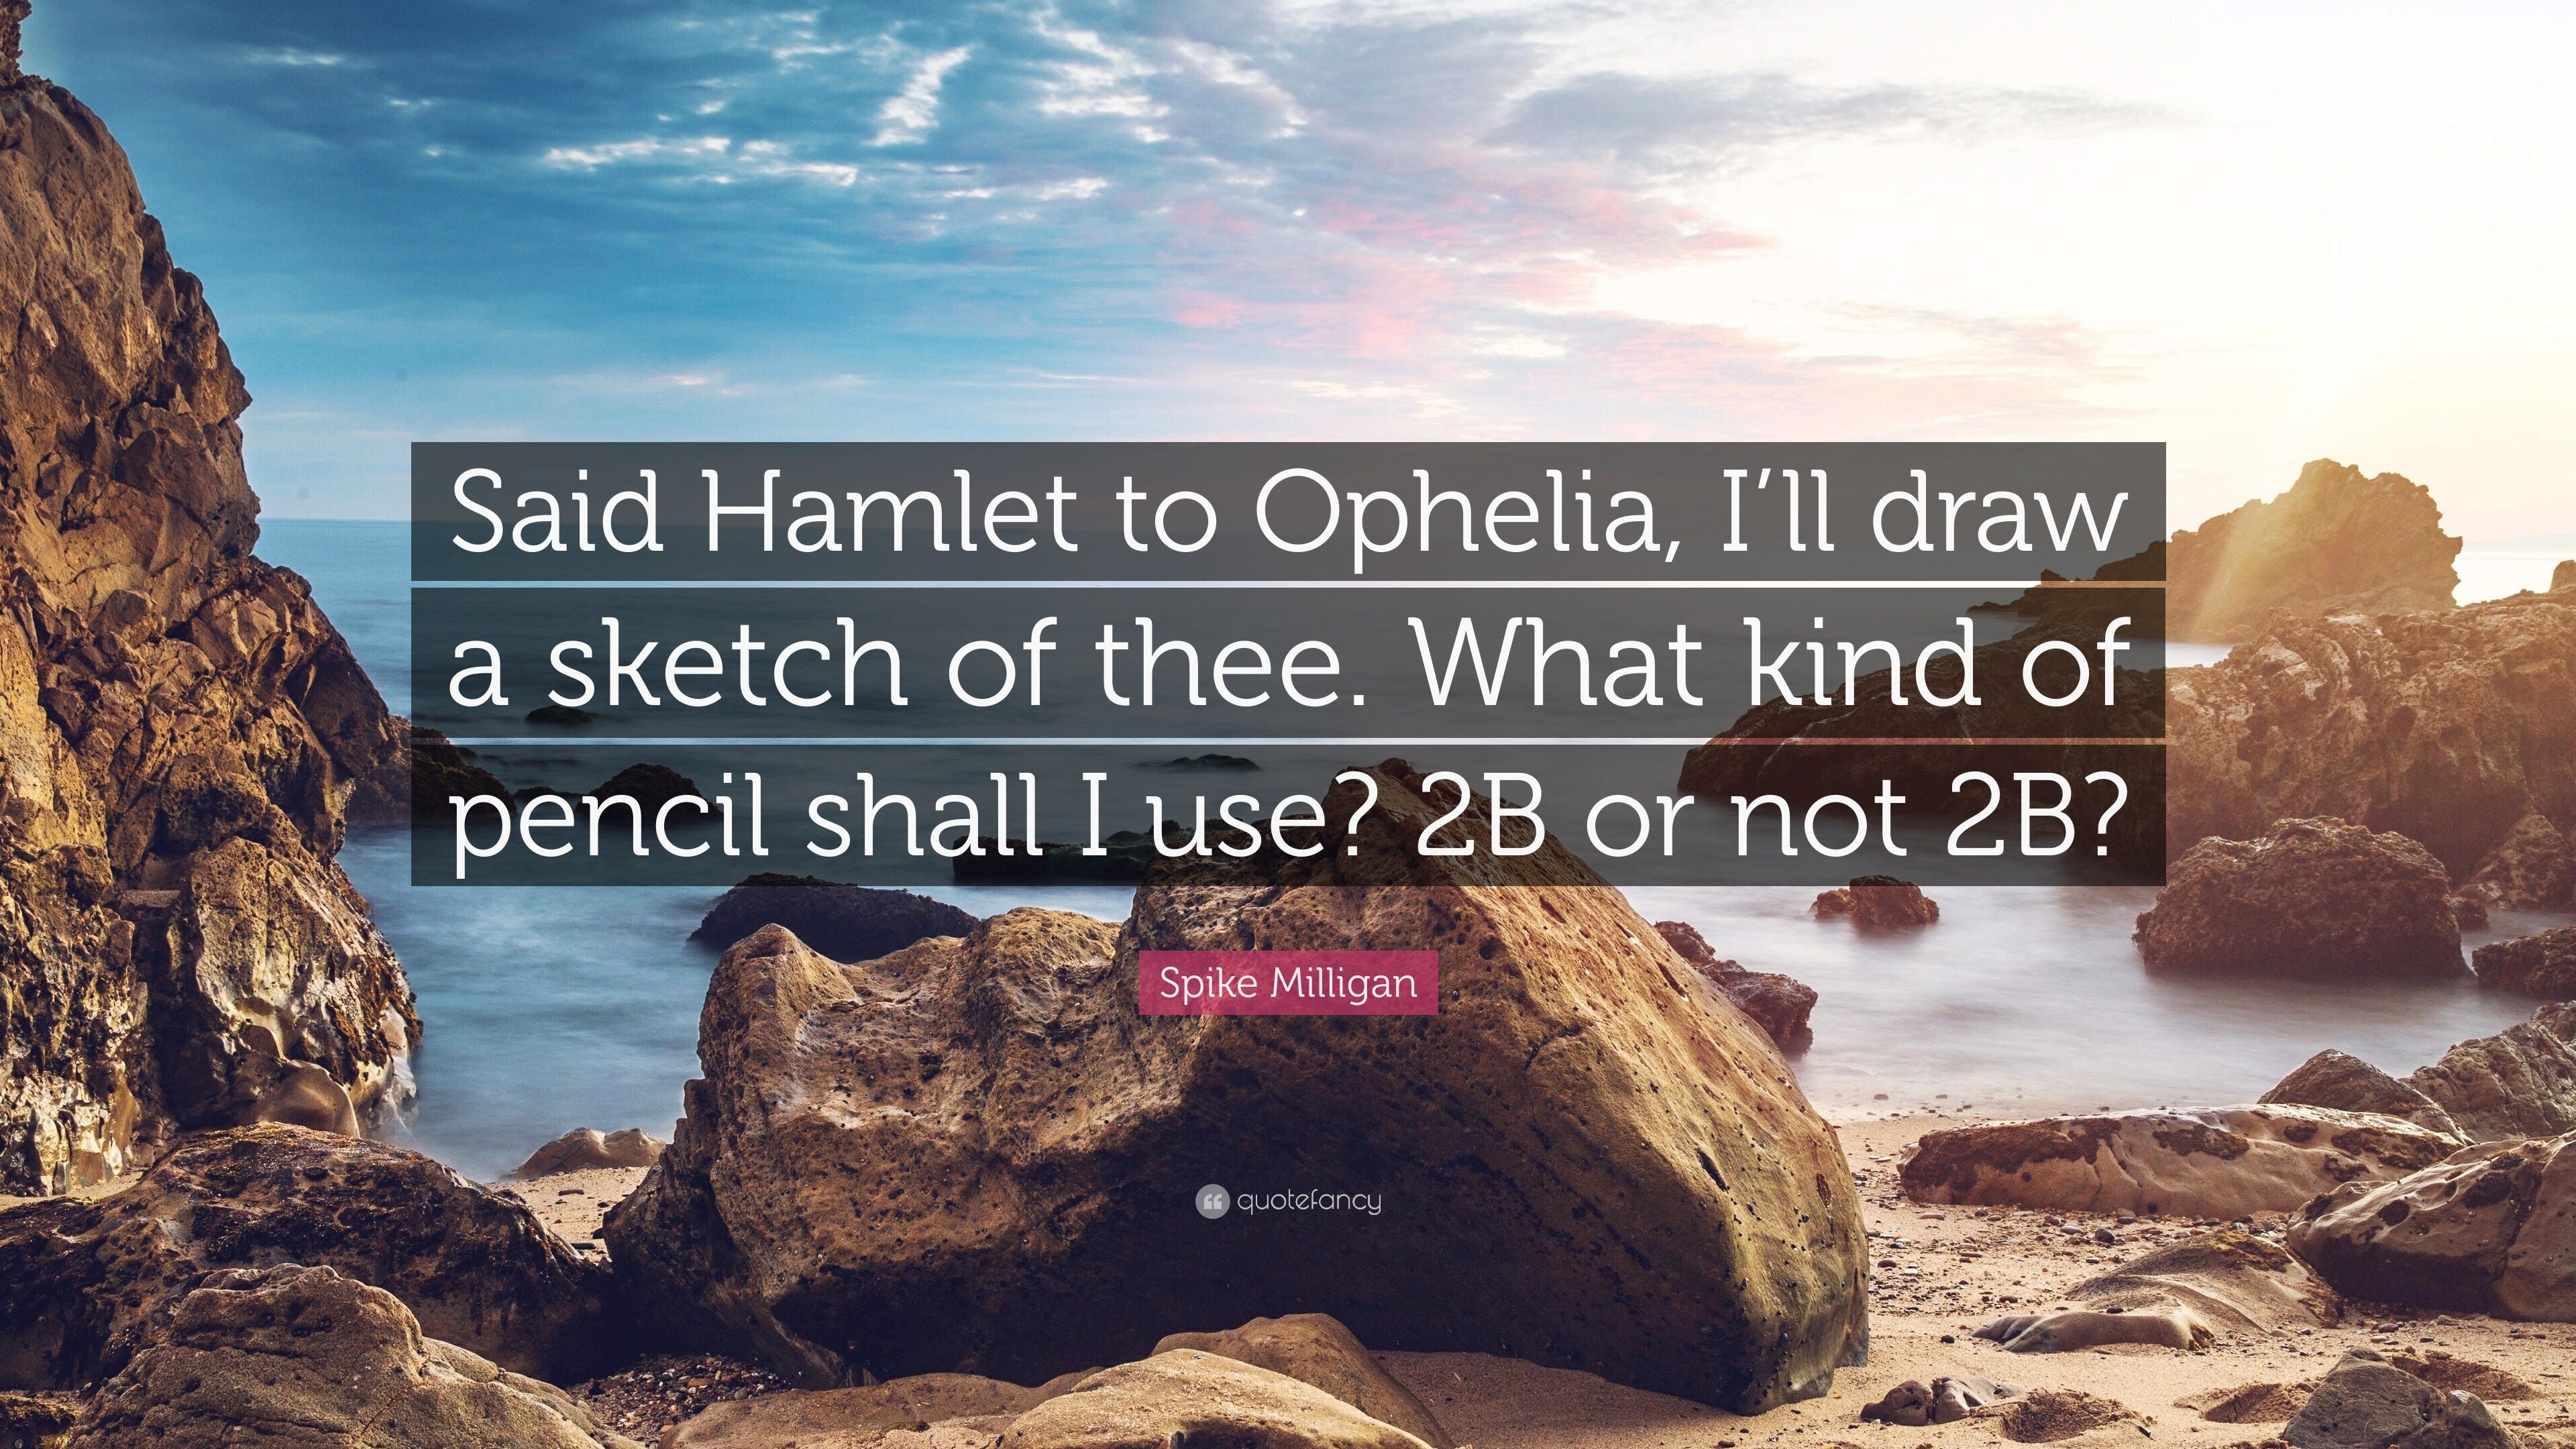 Spike Milligan Quote: “Said Hamlet to Ophelia, I’ll draw a sketch of